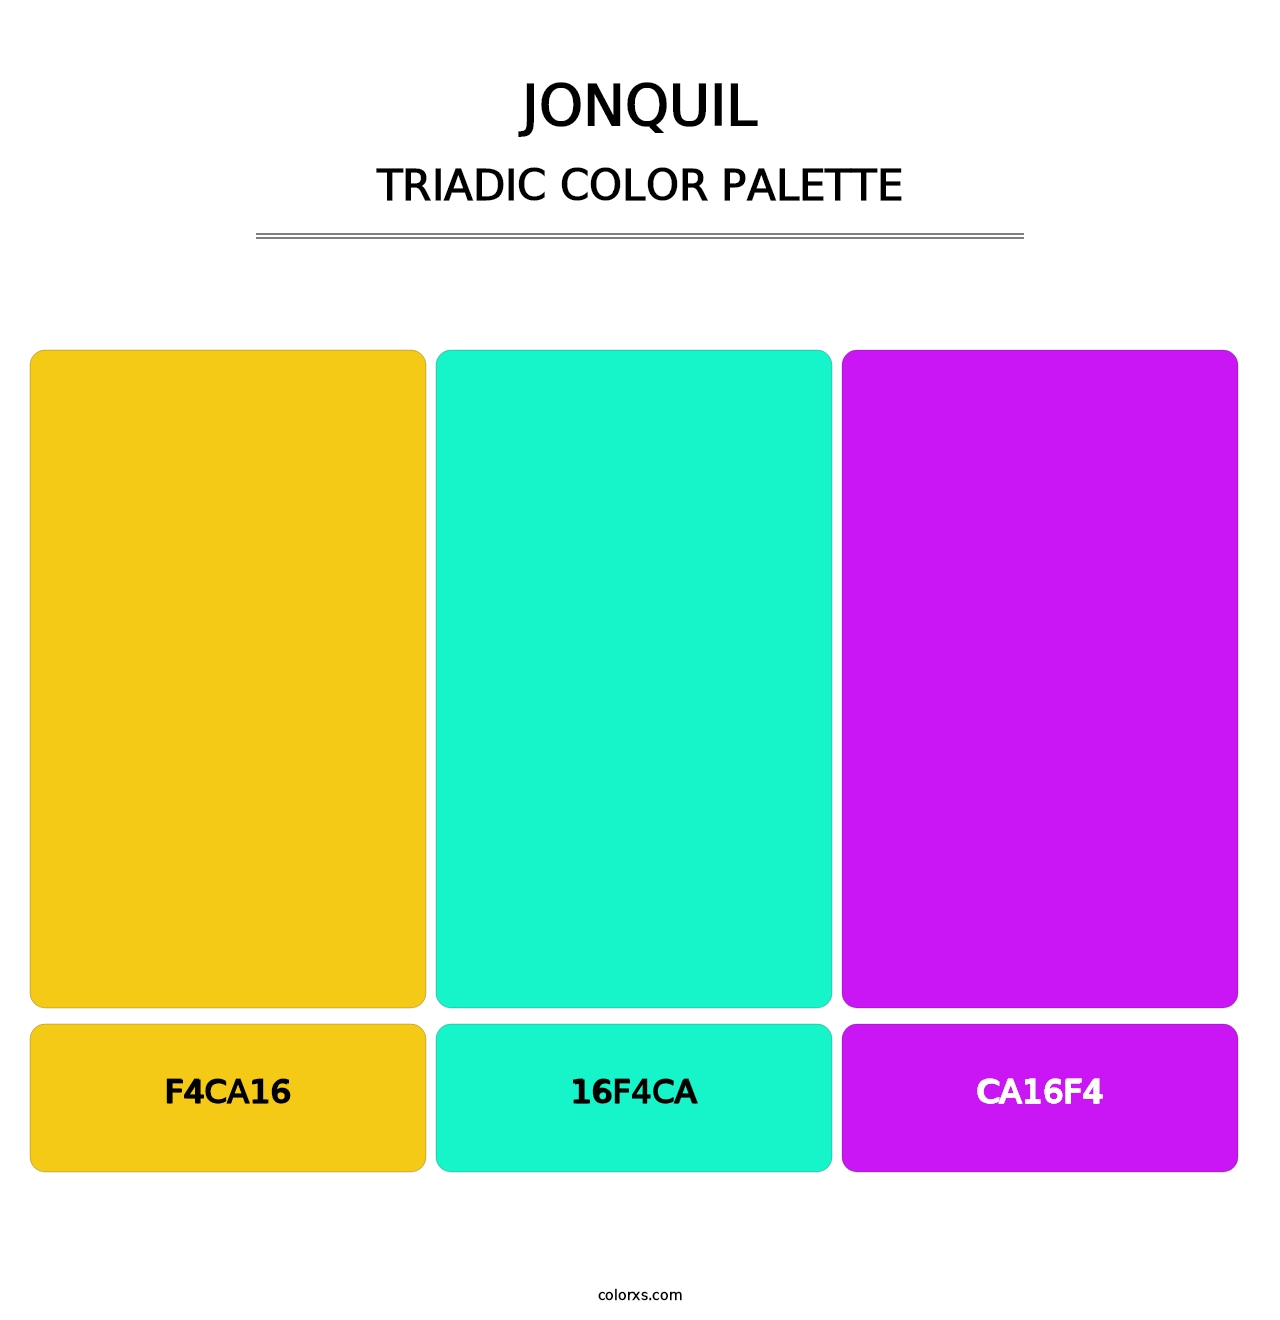 Jonquil - Triadic Color Palette